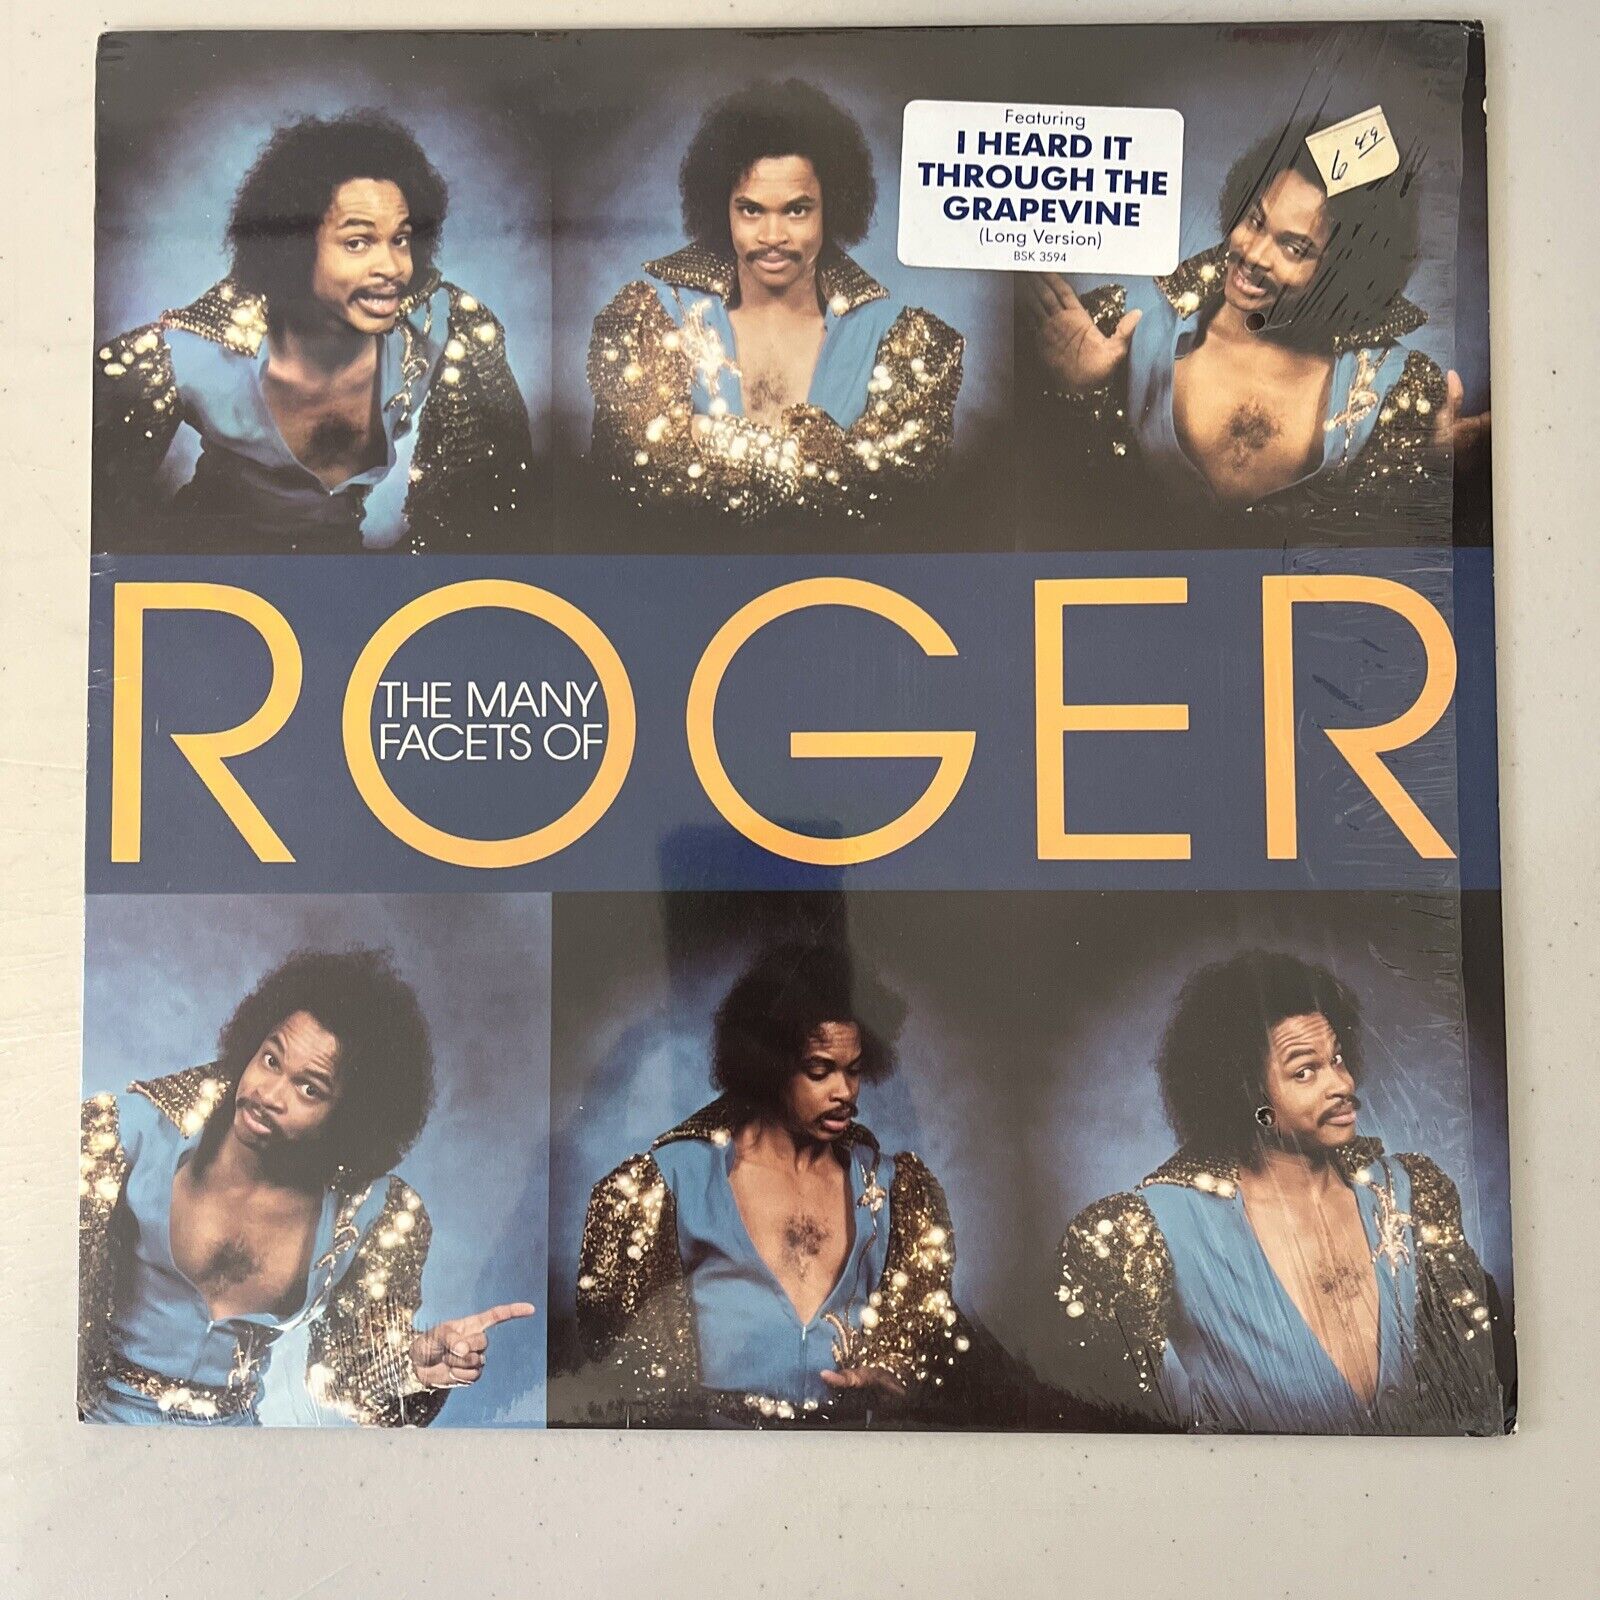 Roger The Many Facets Of Roger 1981 Vinyl LP Zapp Funk VG+/VG+ Play Tested